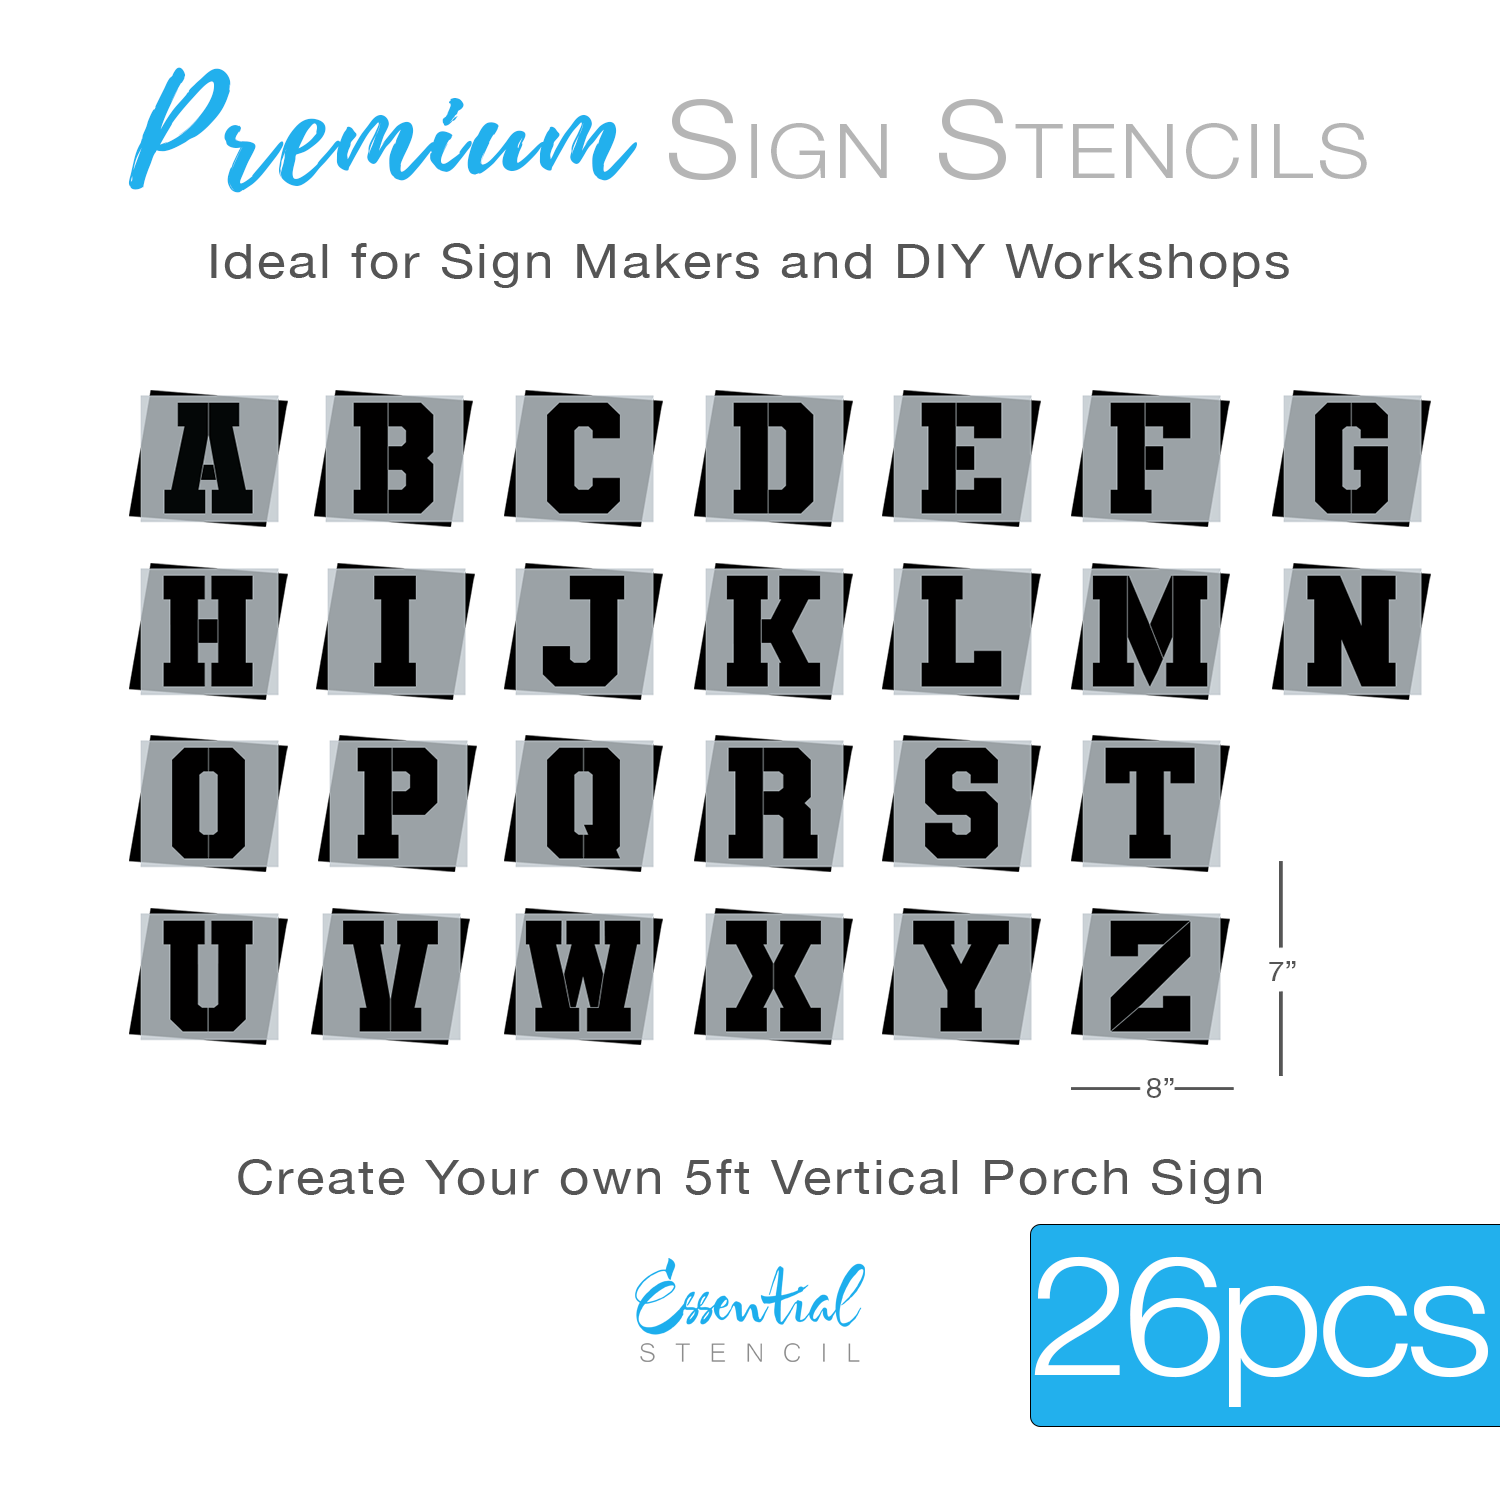 Letter Stencils 2 inch Symbol Numbers Spray Painting Painting Stencils  Craft Stencils for Painting on Fabric Glass Canvas